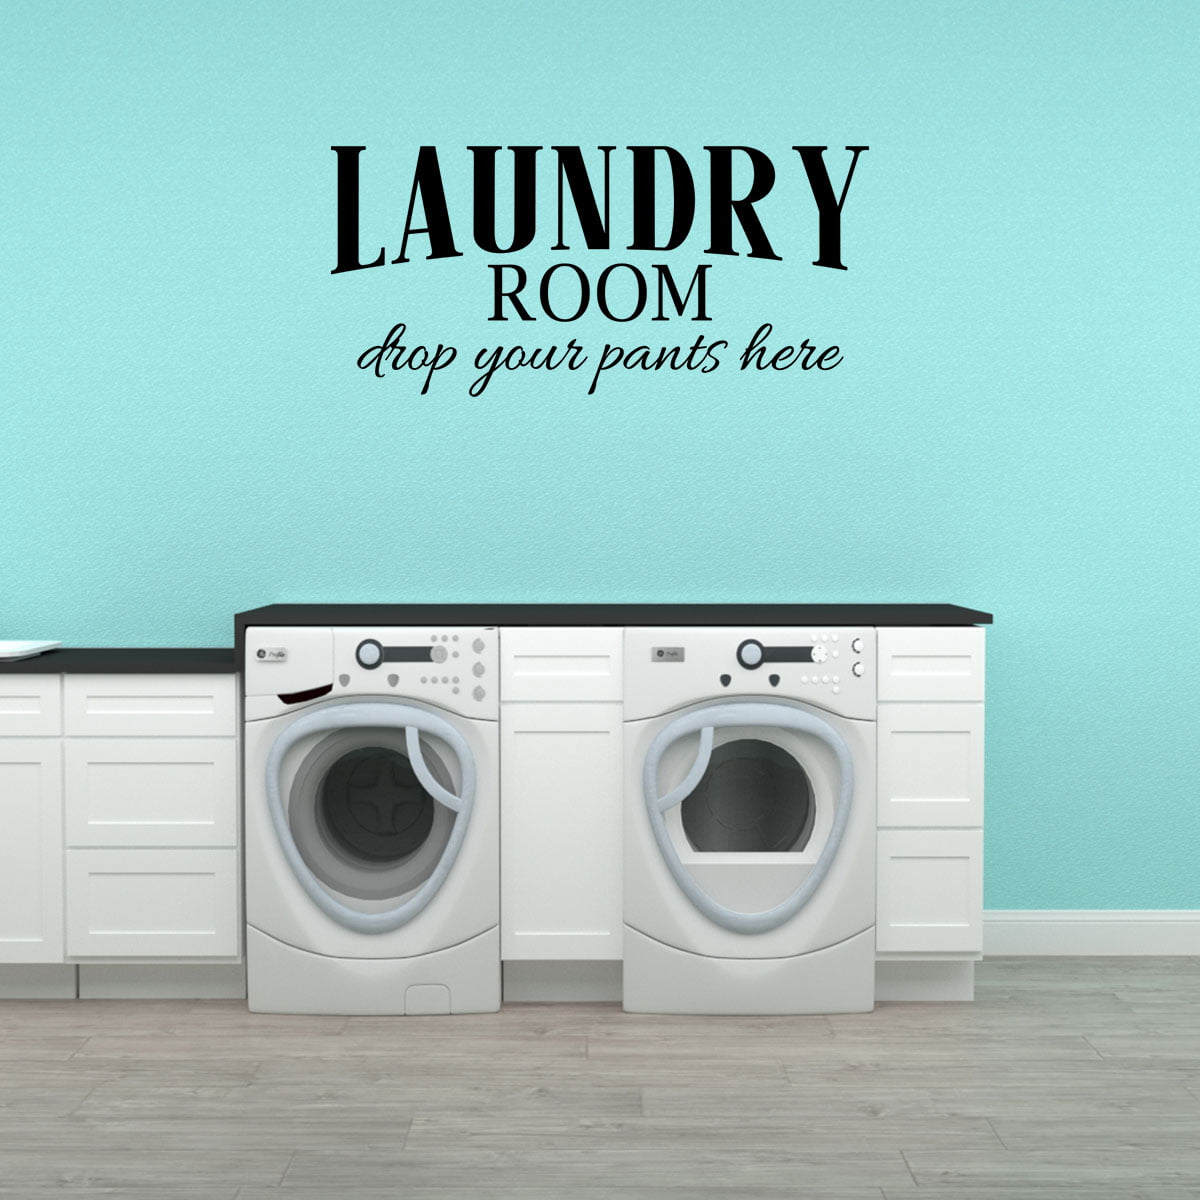 Laundry Room Drop Your Drawers Here ~ Wall or Window Decal 